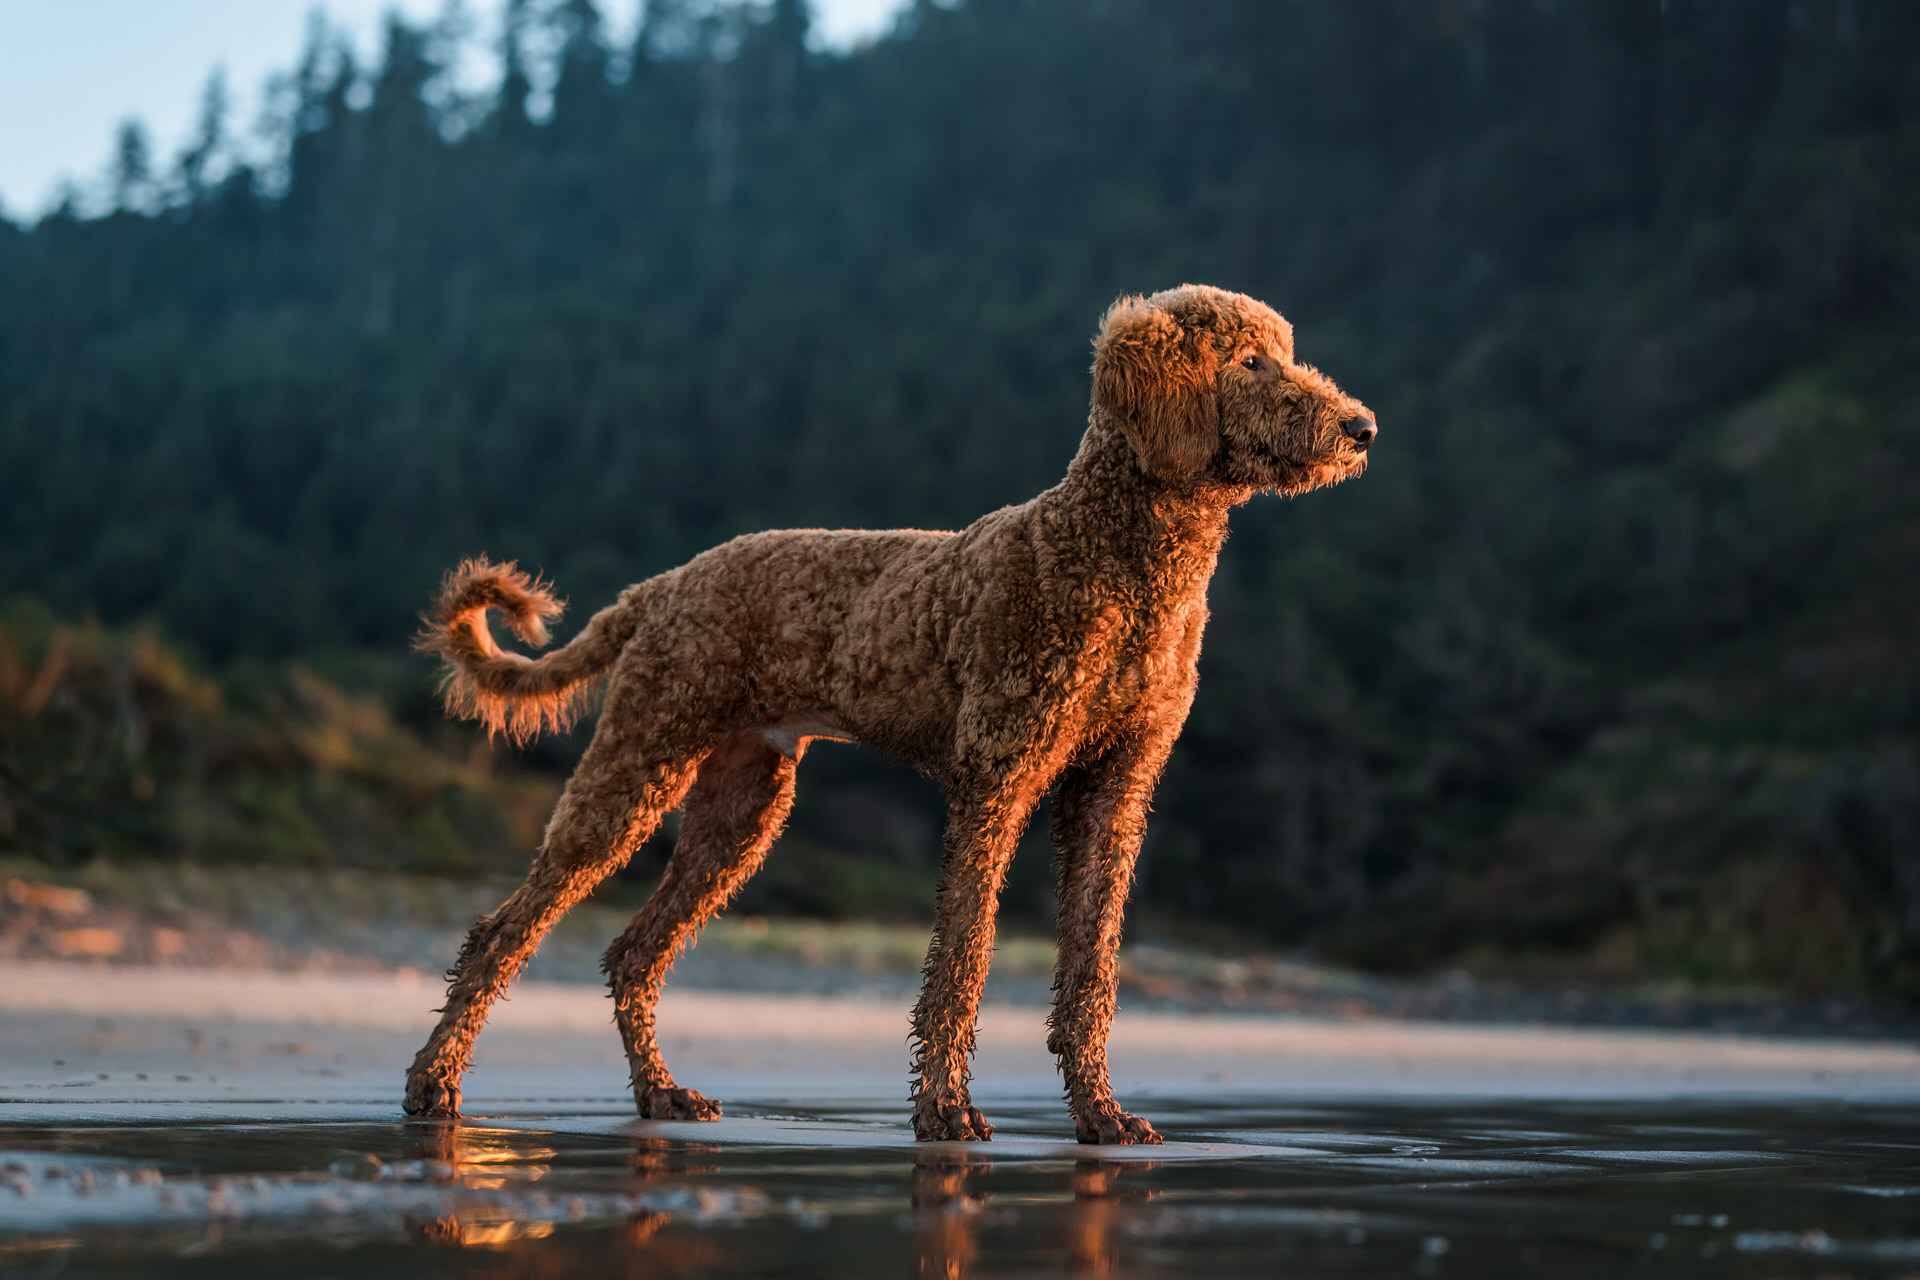 goldendoodle in the sunset light at the Oregon coast